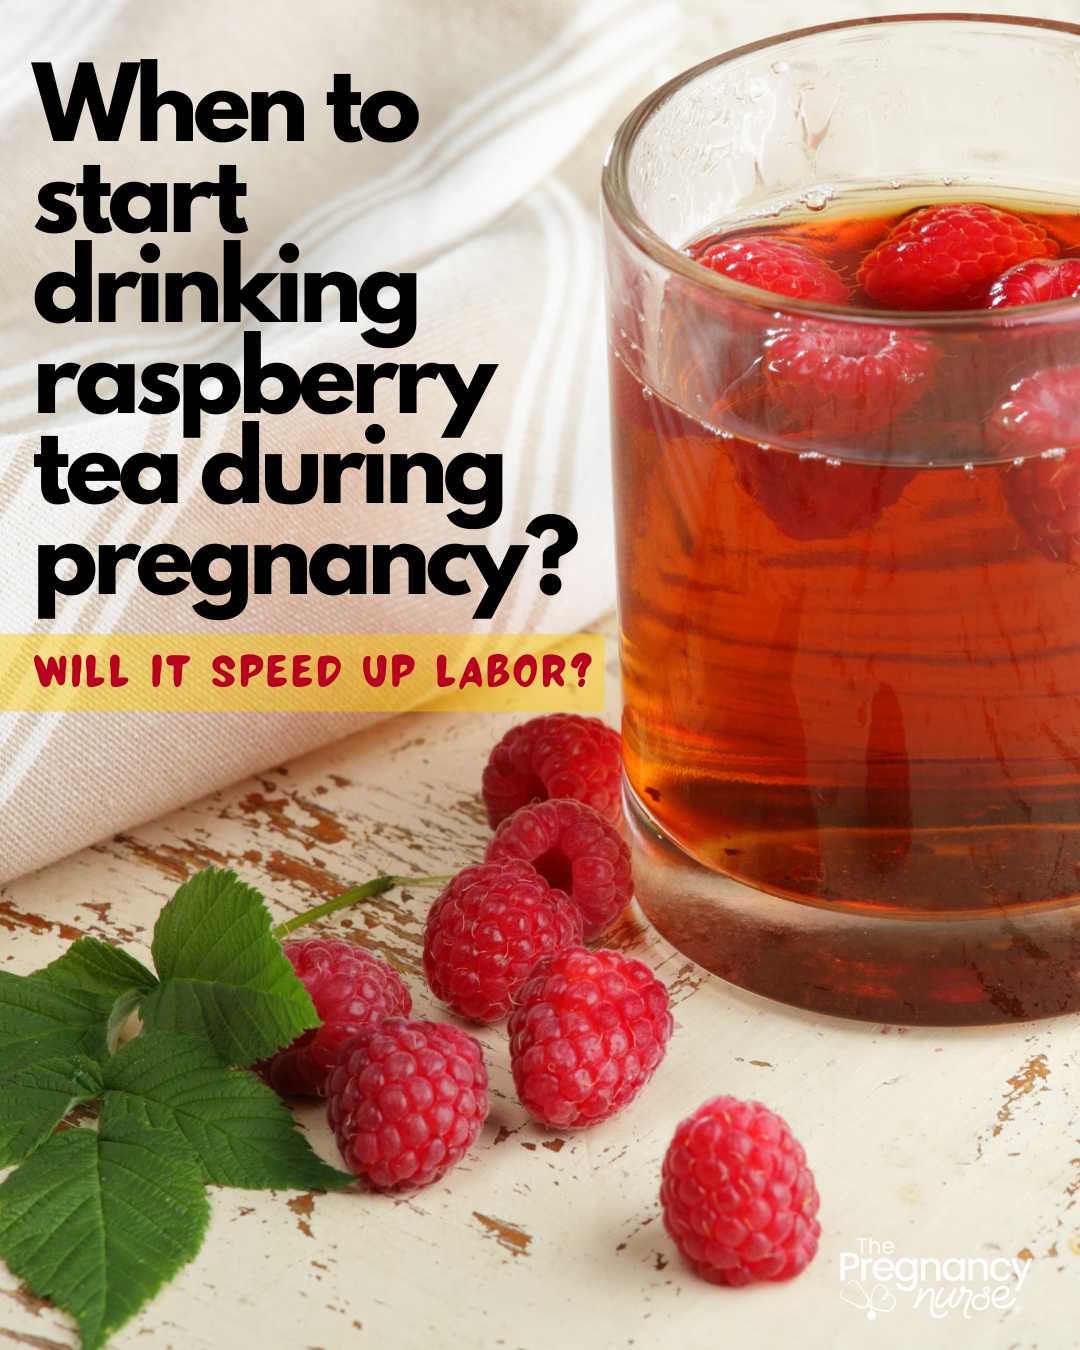 When to start dirnking raspberry tea during pregnancy? Will it put you into labor / raspberry tea and raspberries.